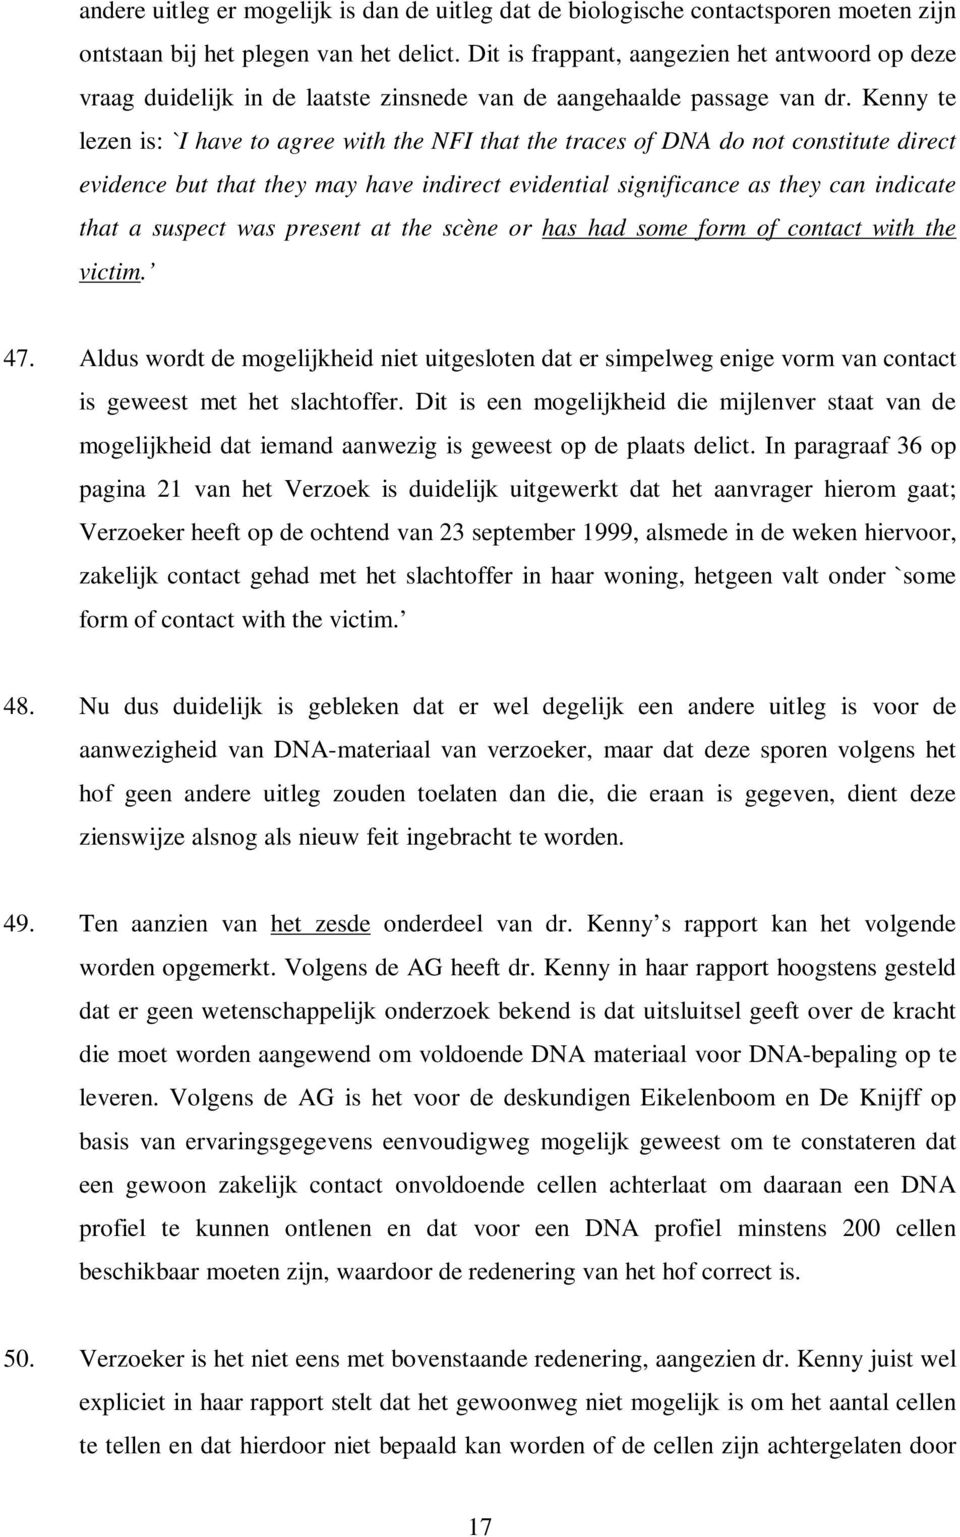 Kenny te lezen is: `I have to agree with the NFI that the traces of DNA do not constitute direct evidence but that they may have indirect evidential significance as they can indicate that a suspect